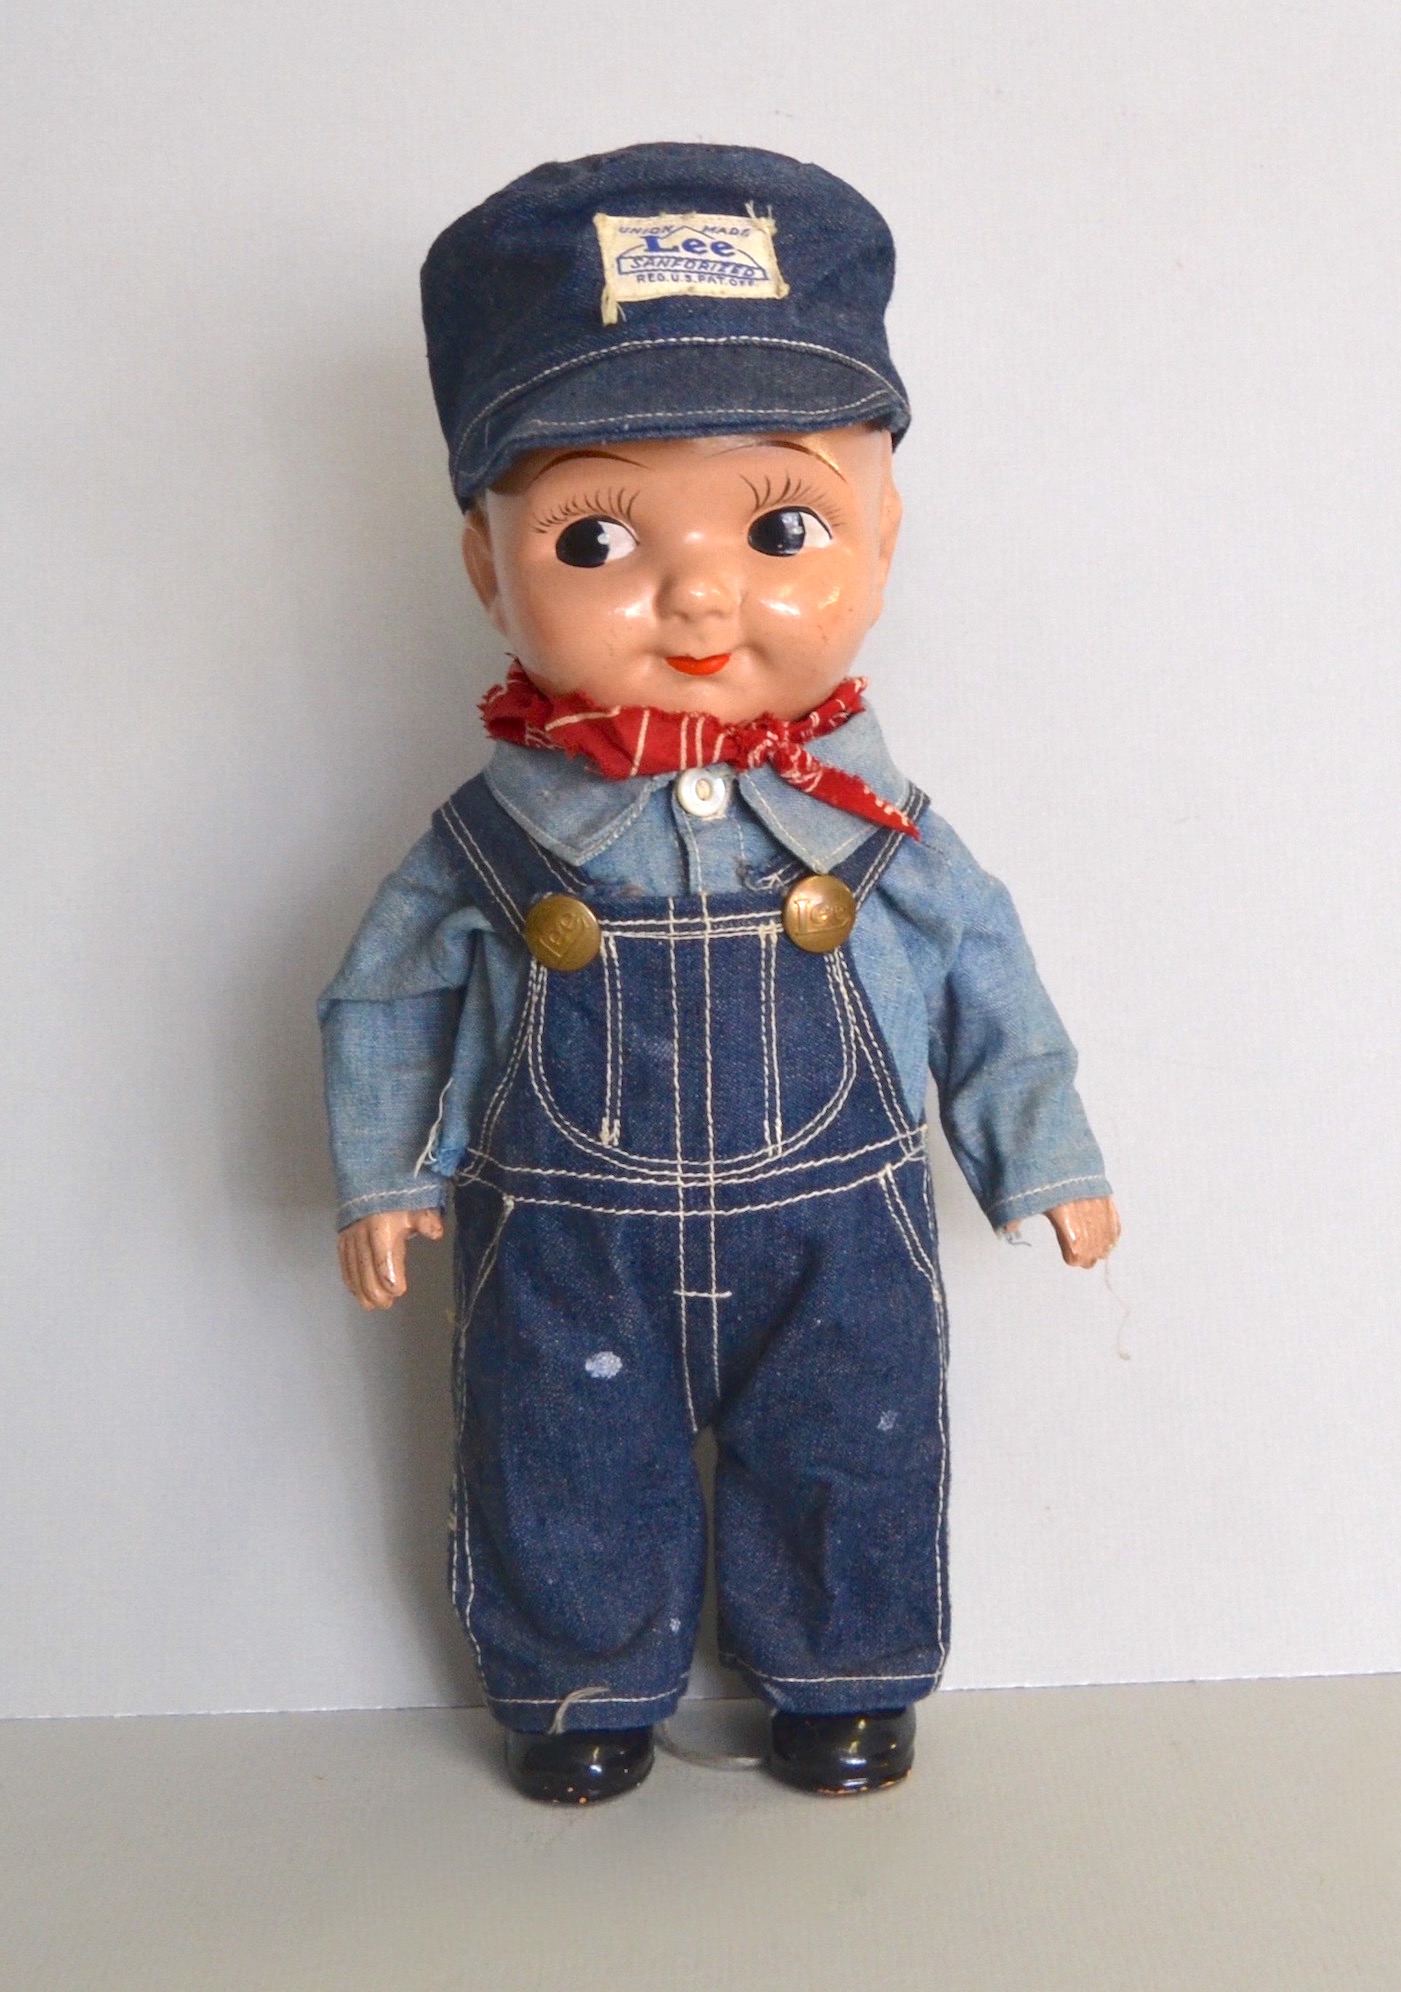 Bargain John's Antiques | Antique Buddy Lee Doll Overalls Railroad with ...